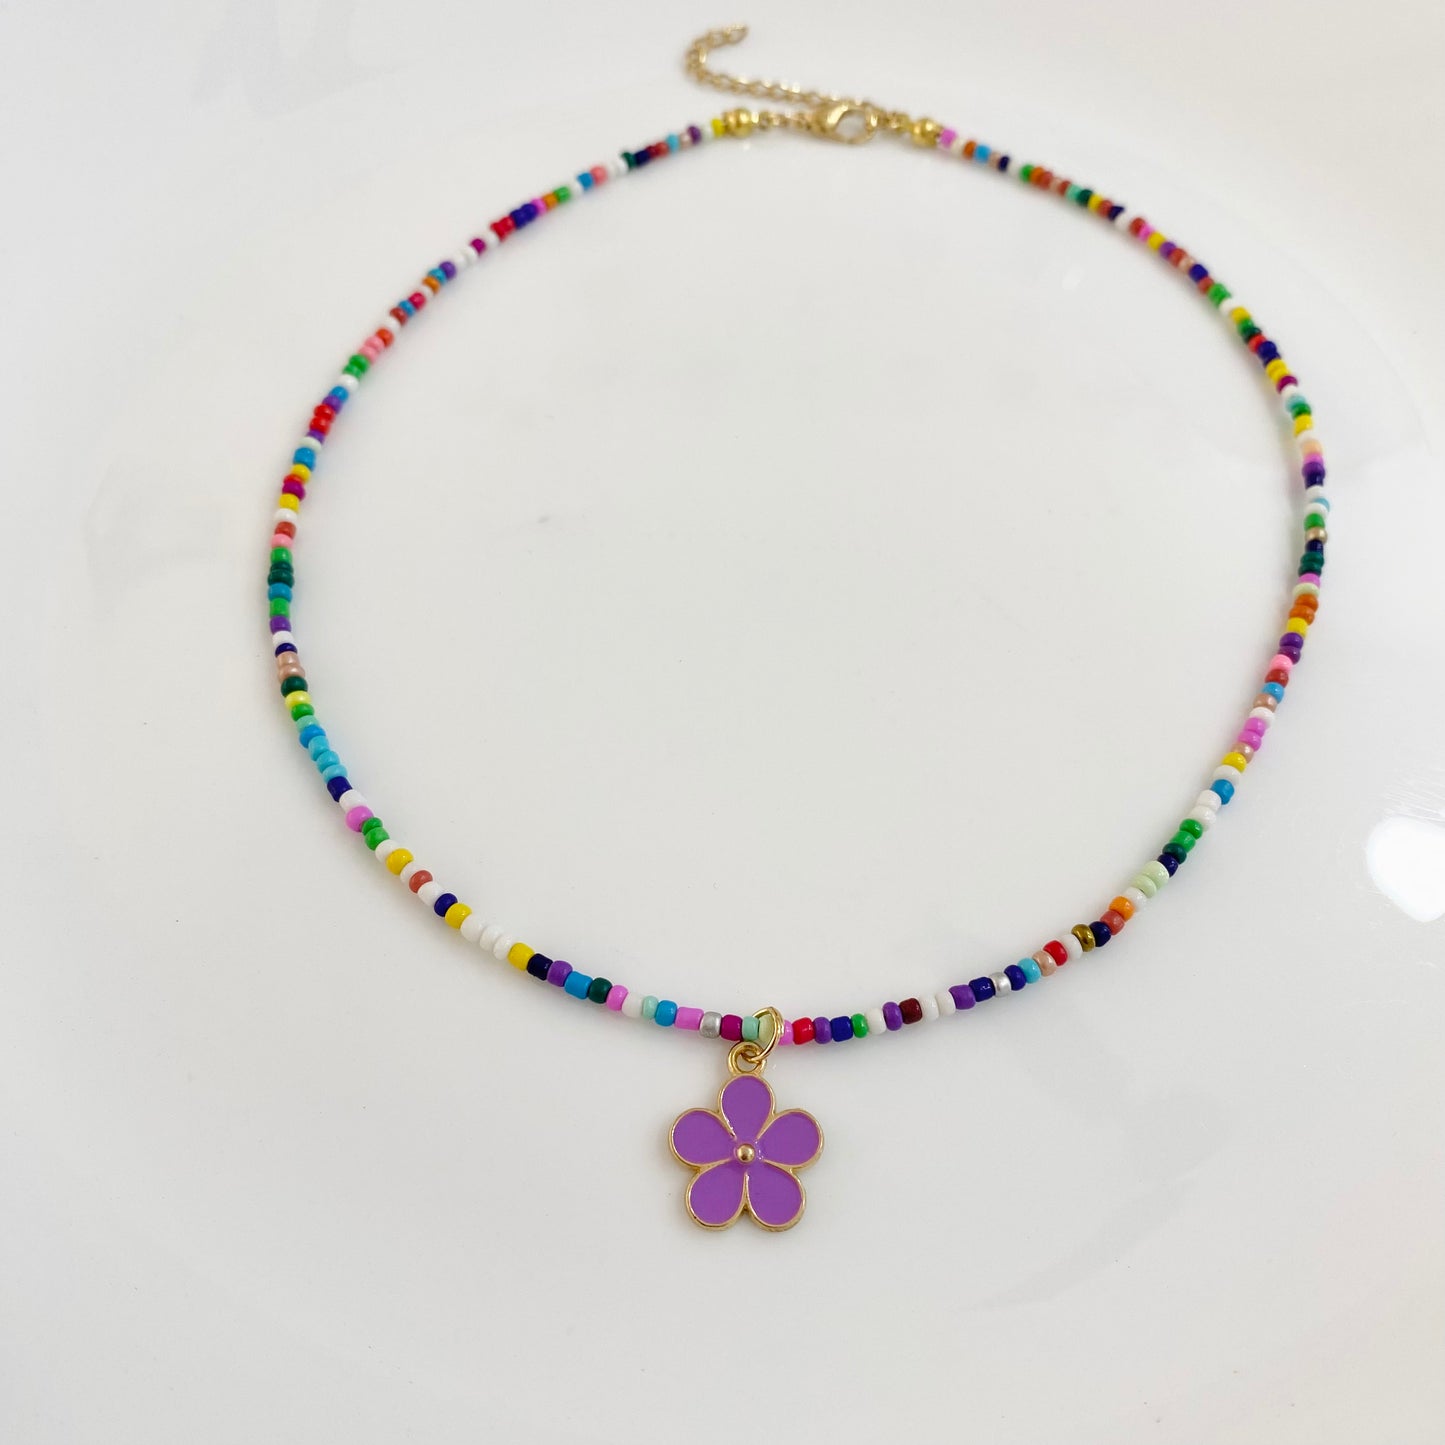 Small Flower beads necklace